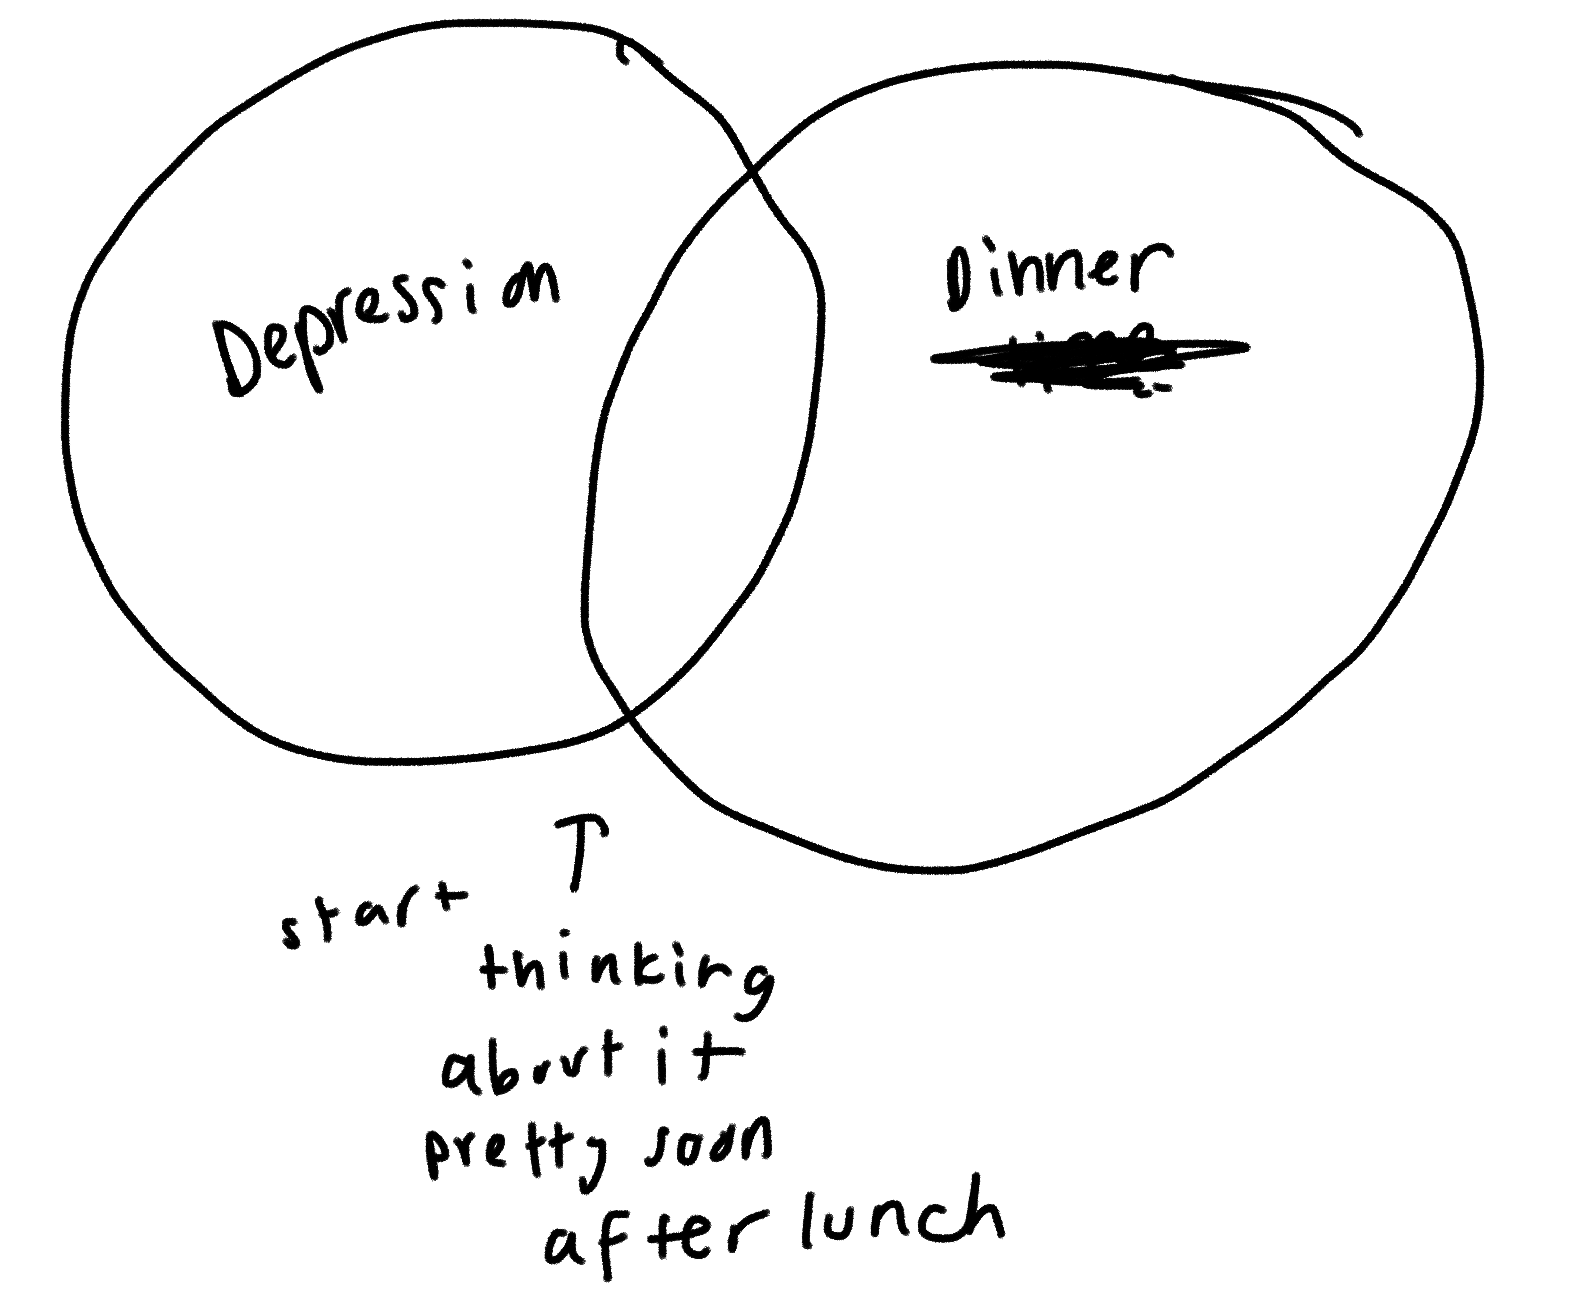 Depression + dinner = start thinking about it pretty soon after lunch